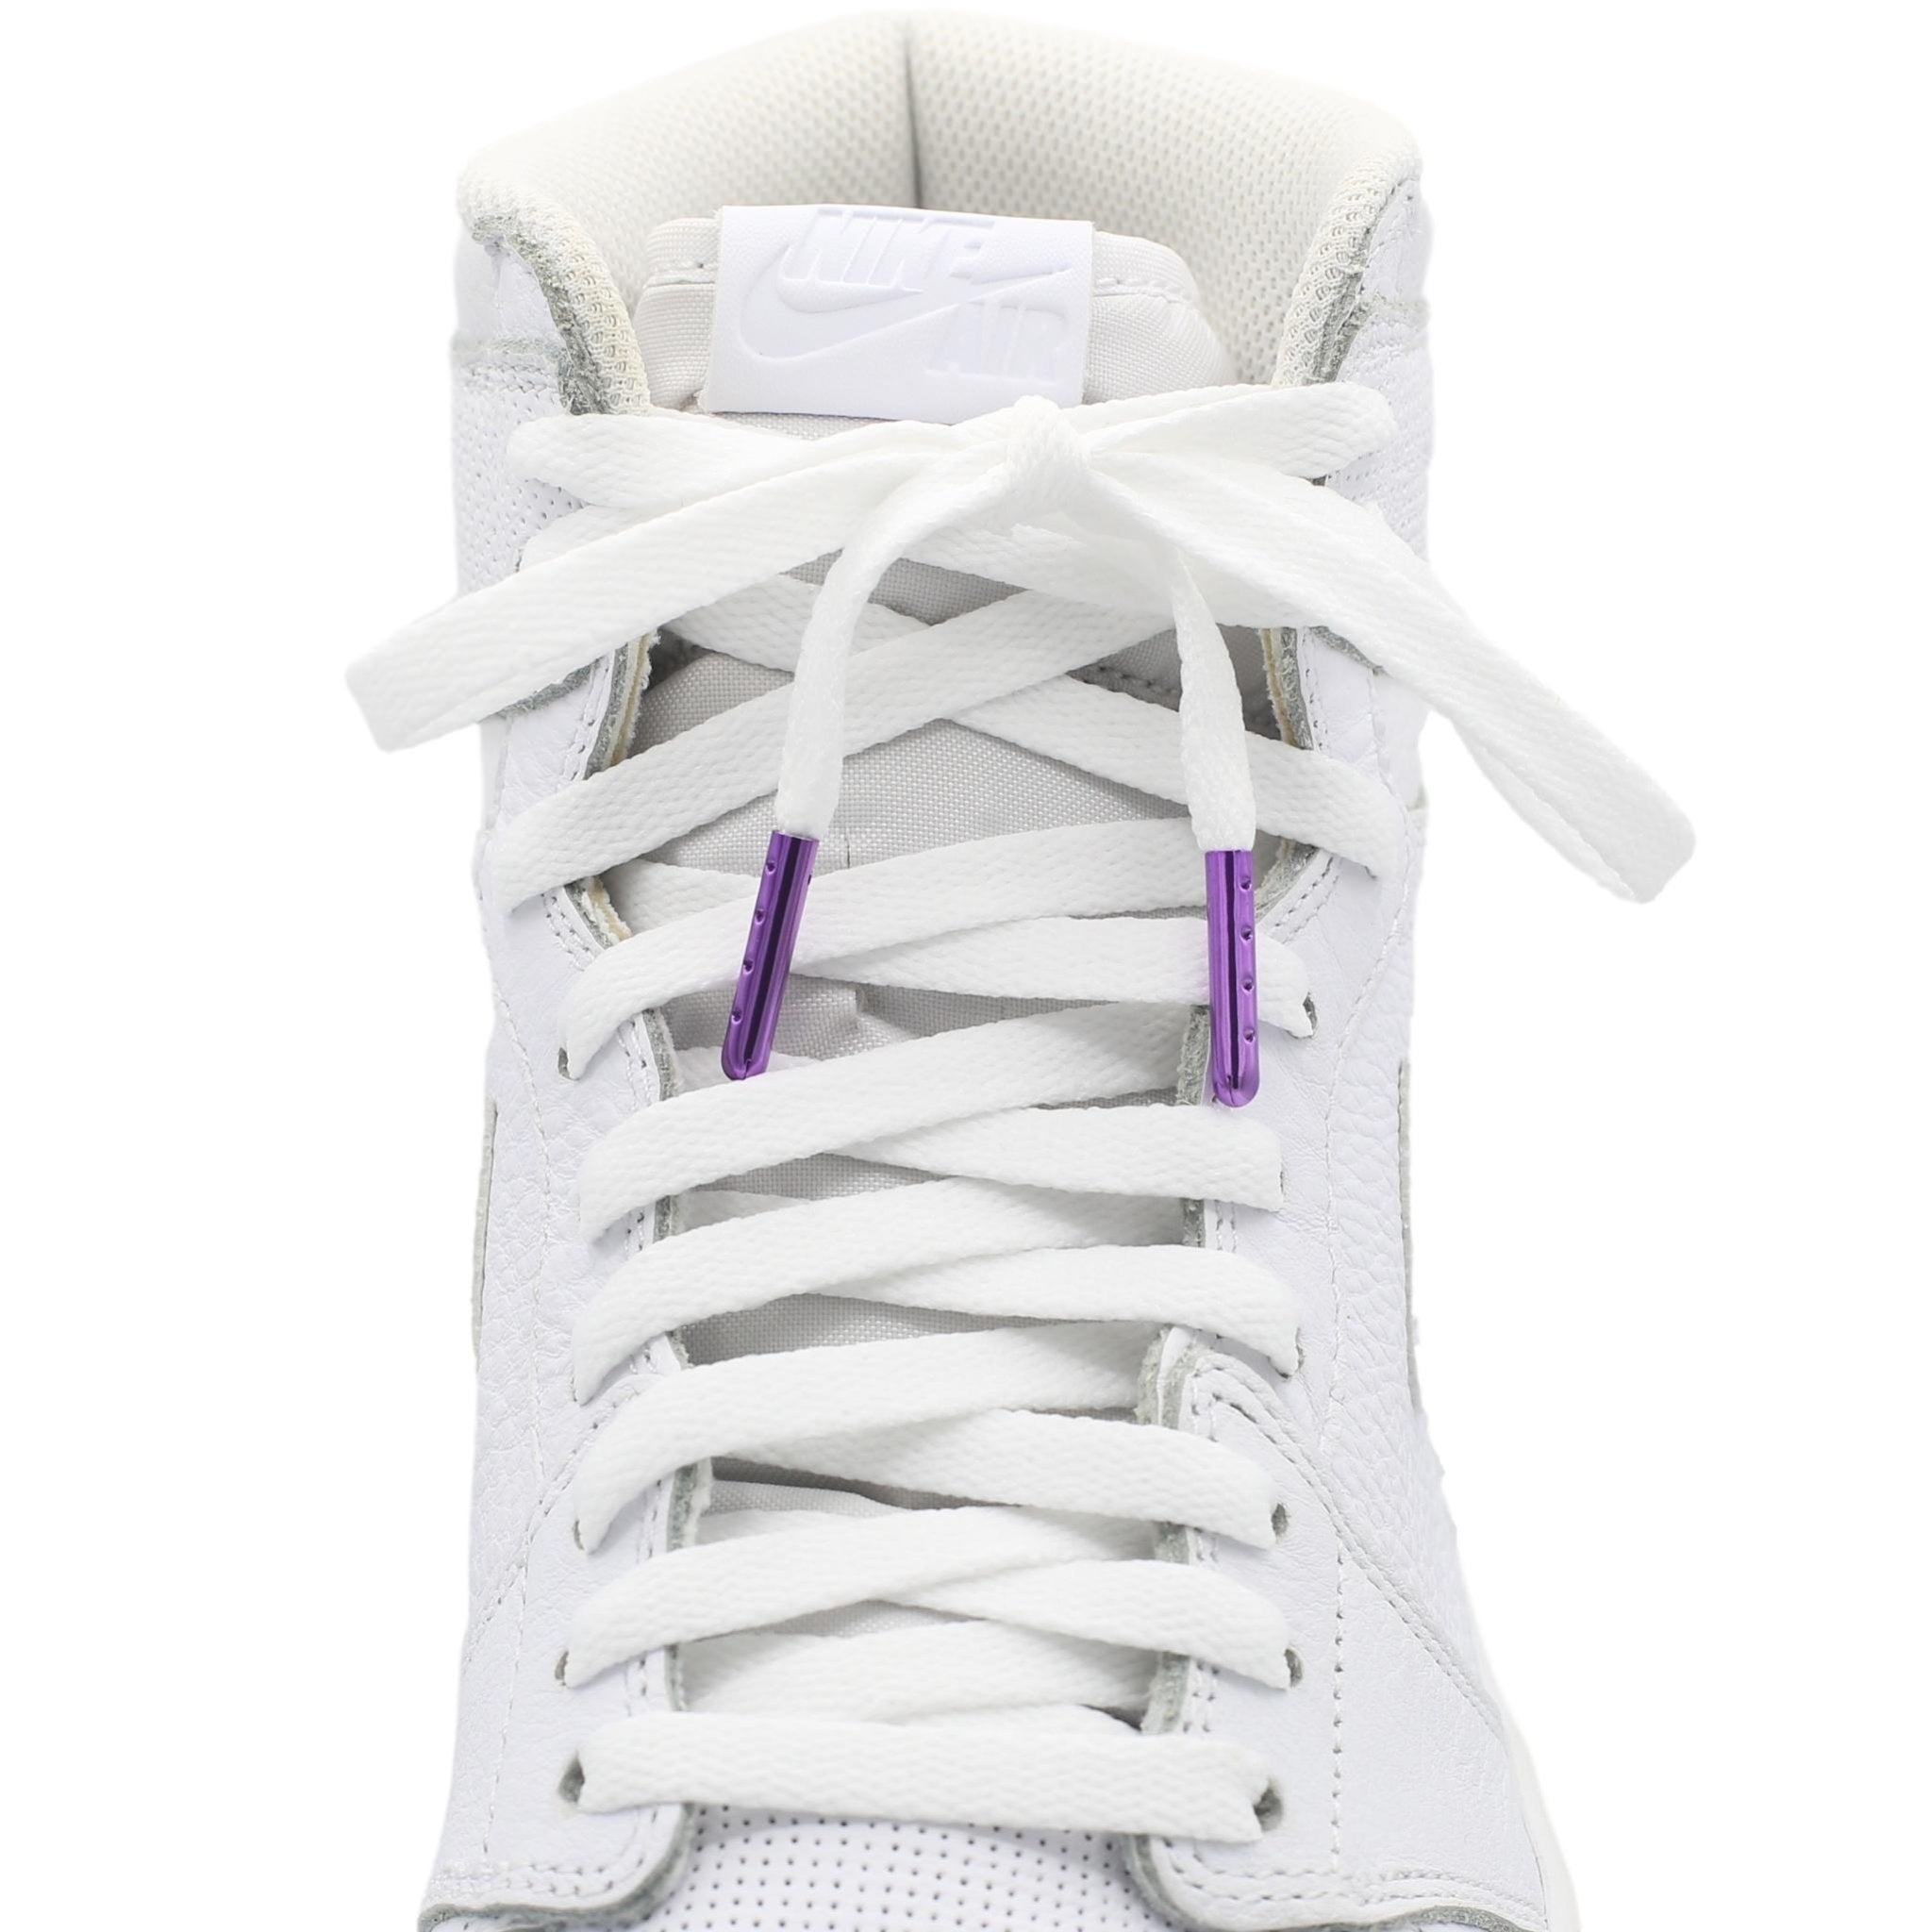 Round Metal Tip Sneaker or Boot Shoelaces White / Black Shoe Lace Strings  With Gold or Silver Aglets 